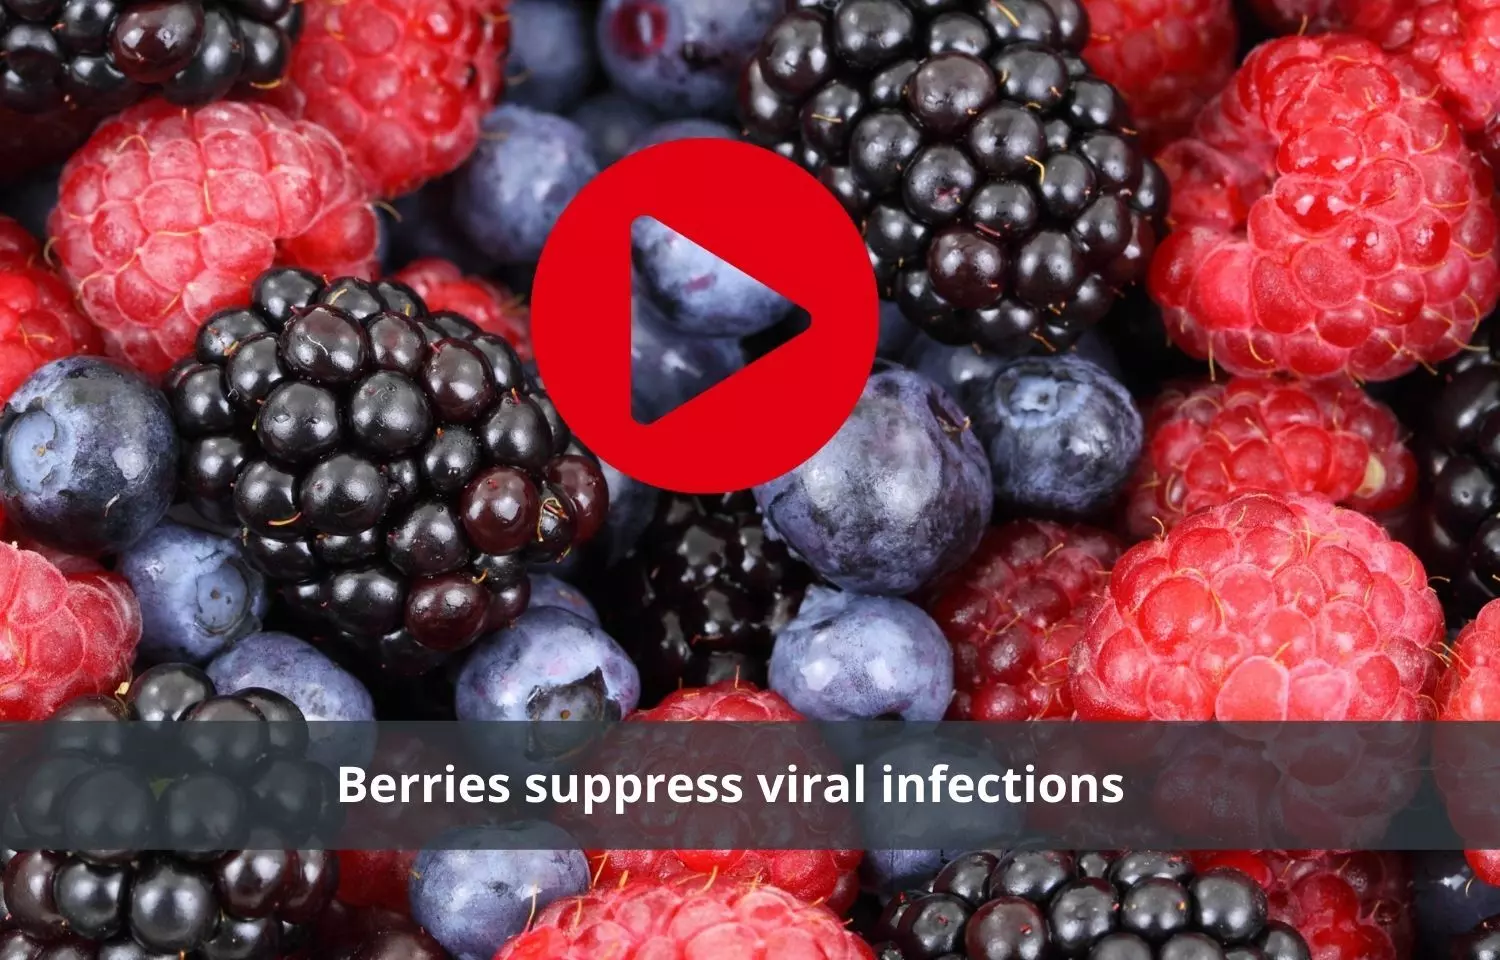 Berries consumption to prevent viral infections